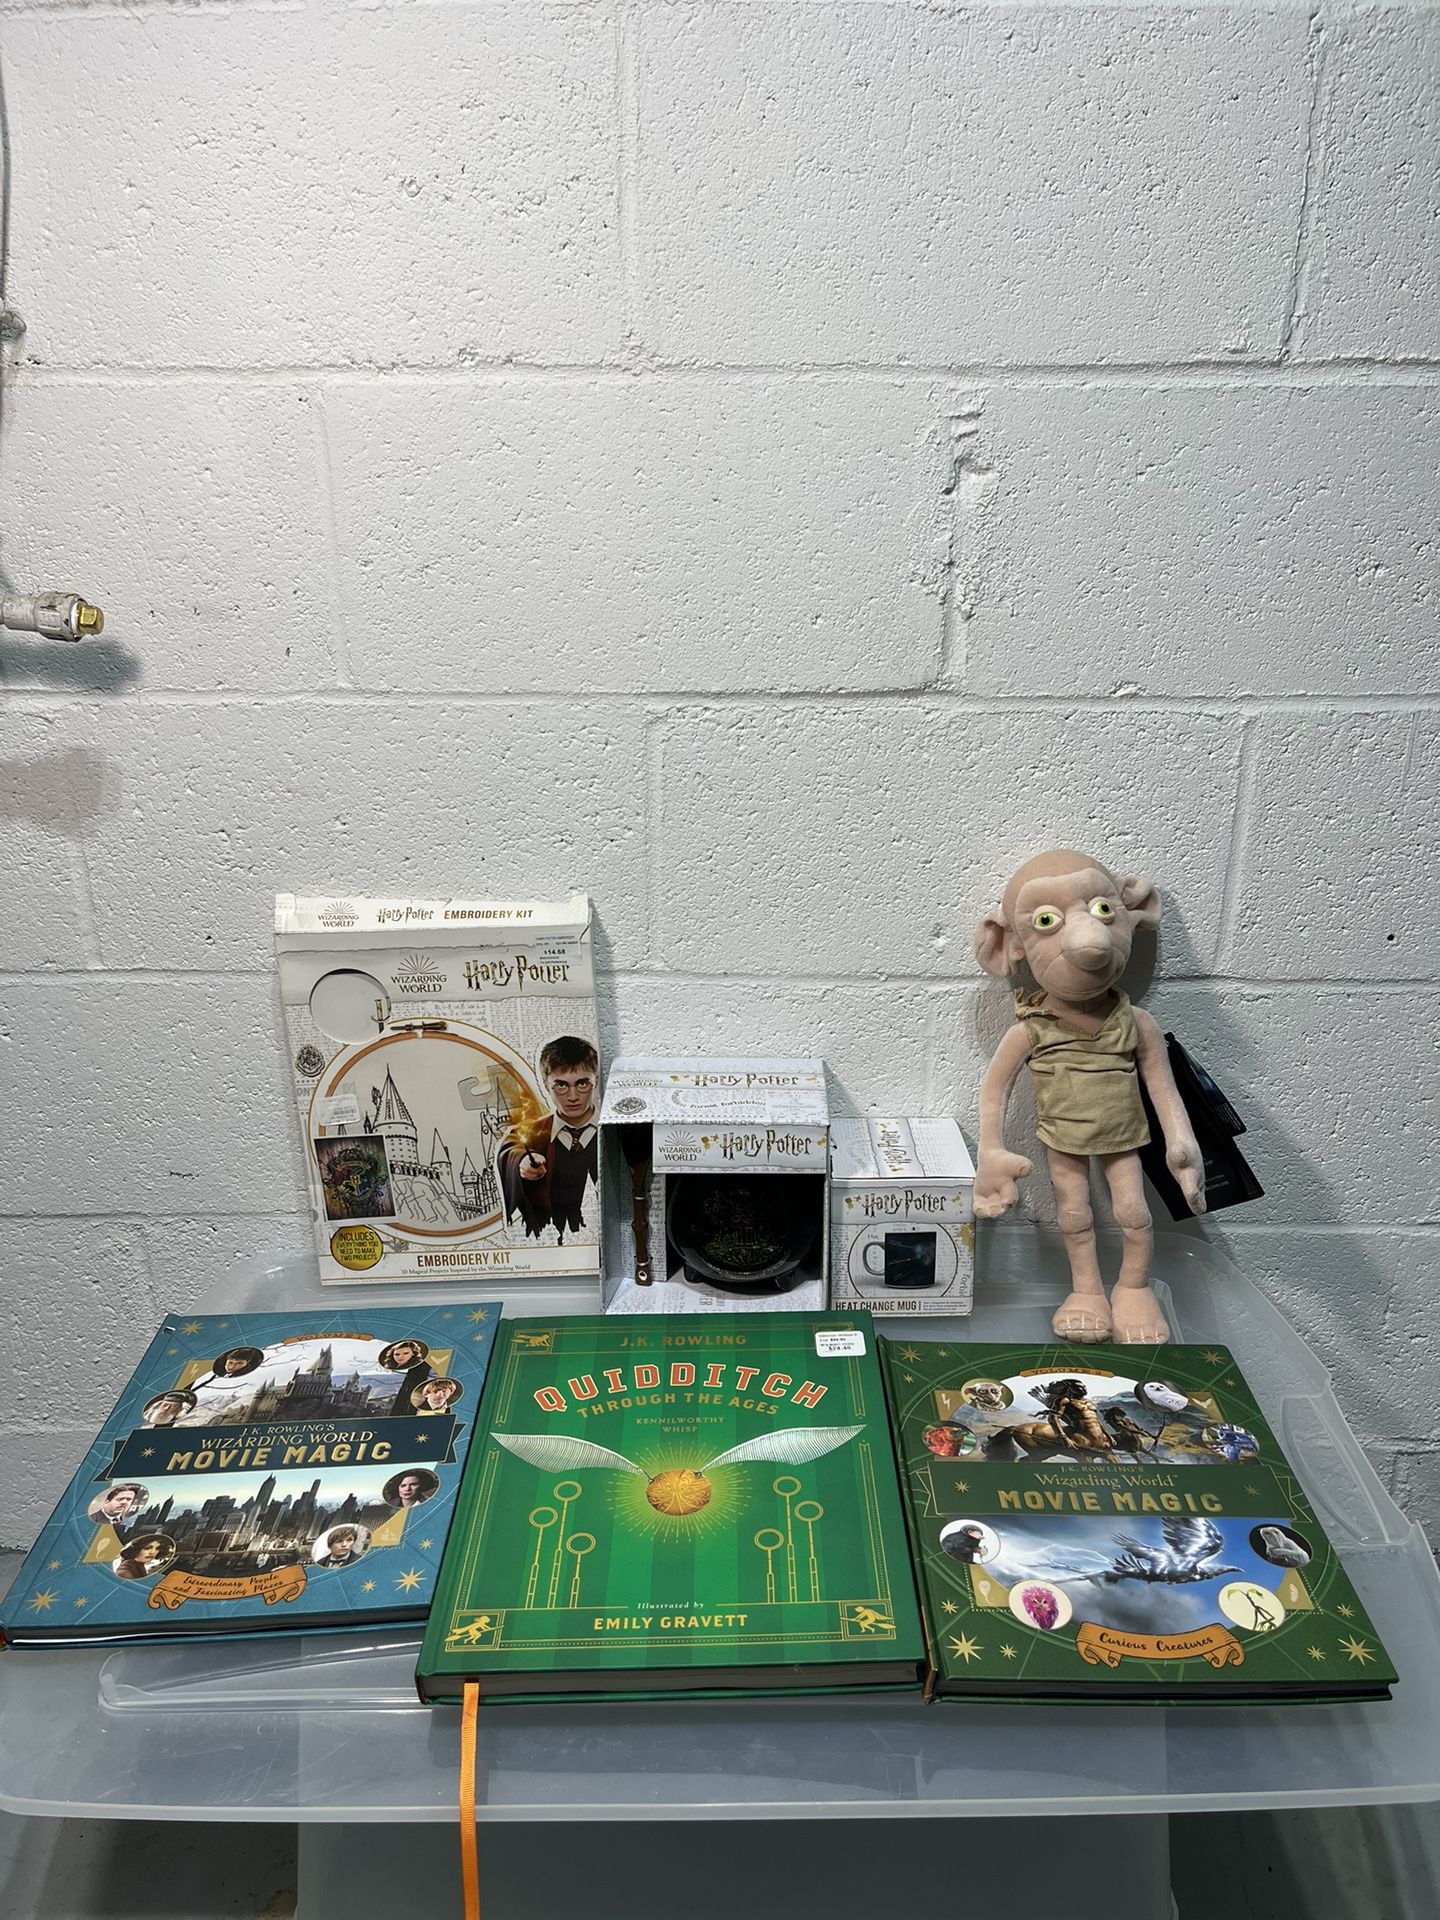 Harry Potter Set, 3 Books, 1 Embroidery, Plush Donny, Mug And Other 